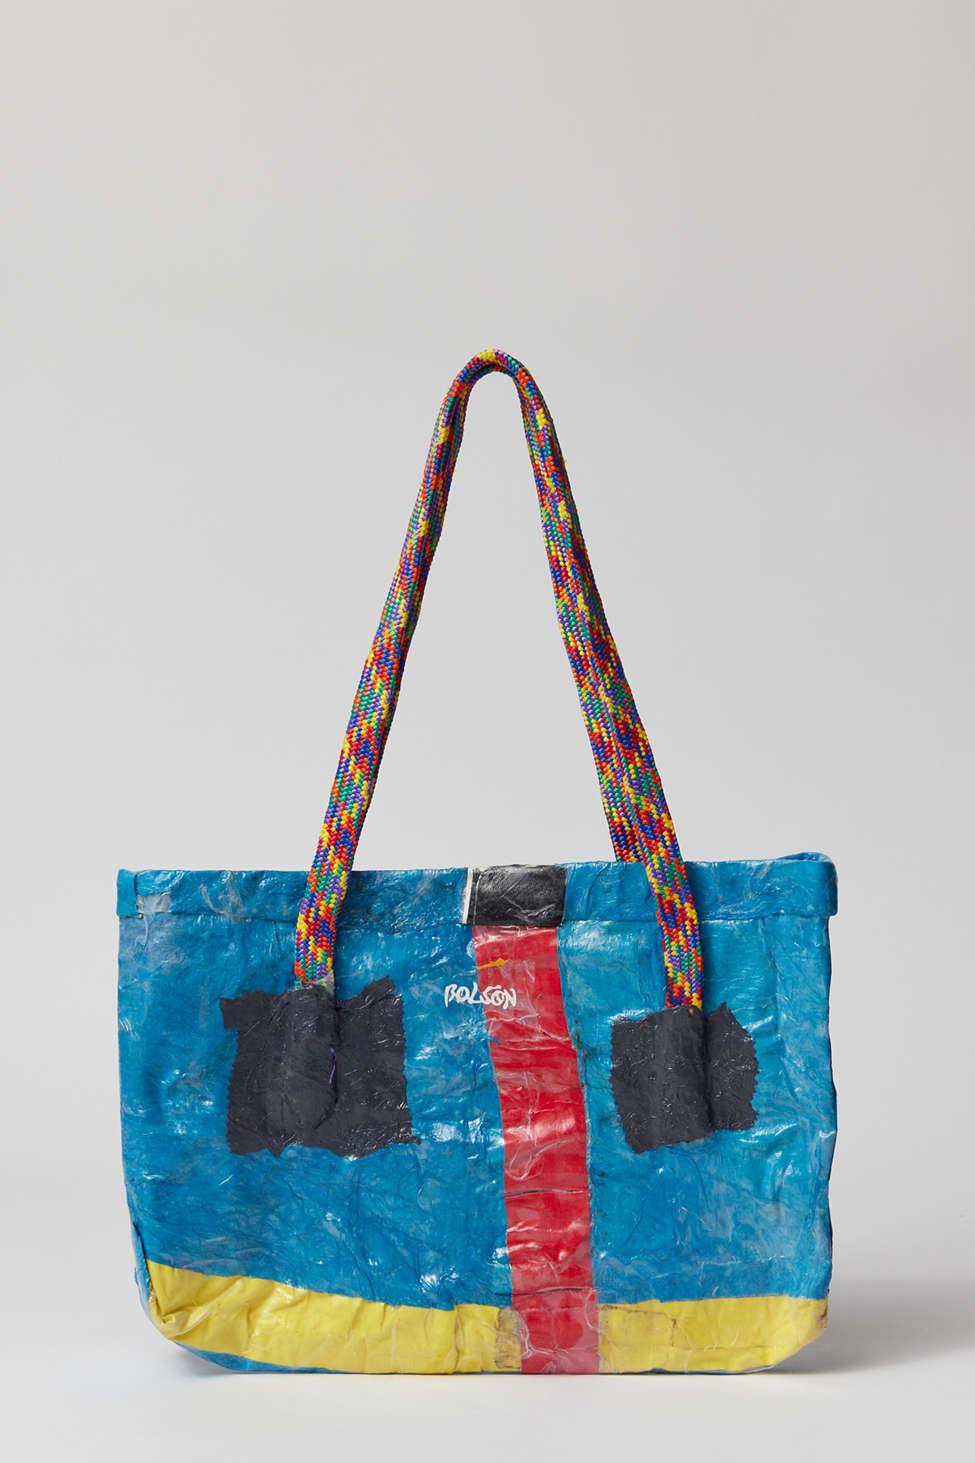 Women's bags made of canvas, handmade unique pieces